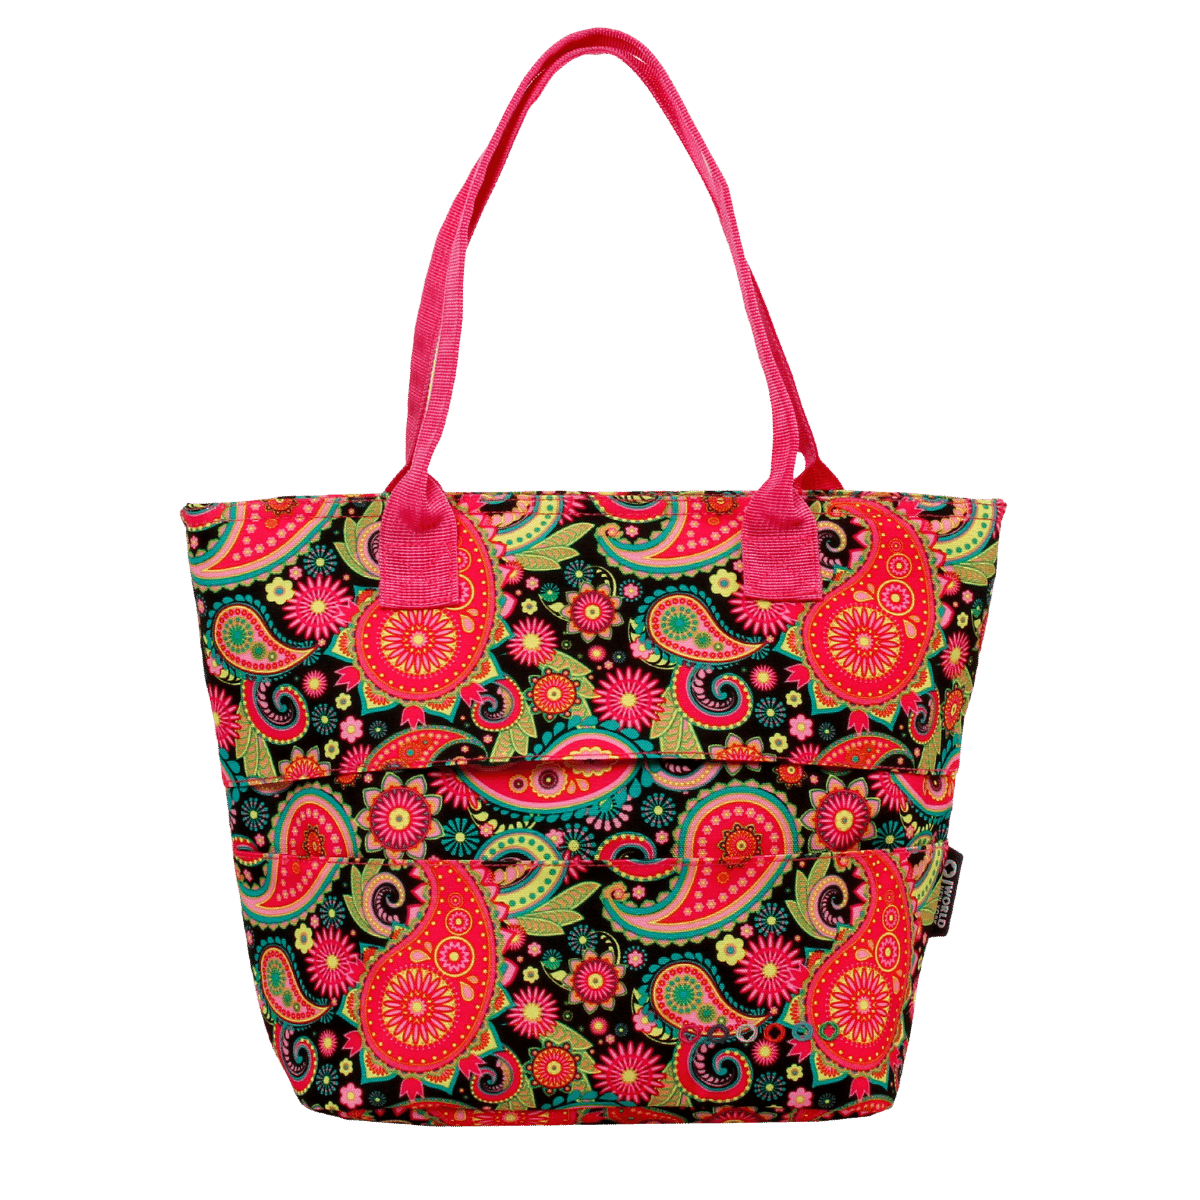 Lola Insulated Lunch Tote Bag - JWorldstore-LUNCH BAG-J WORLD,